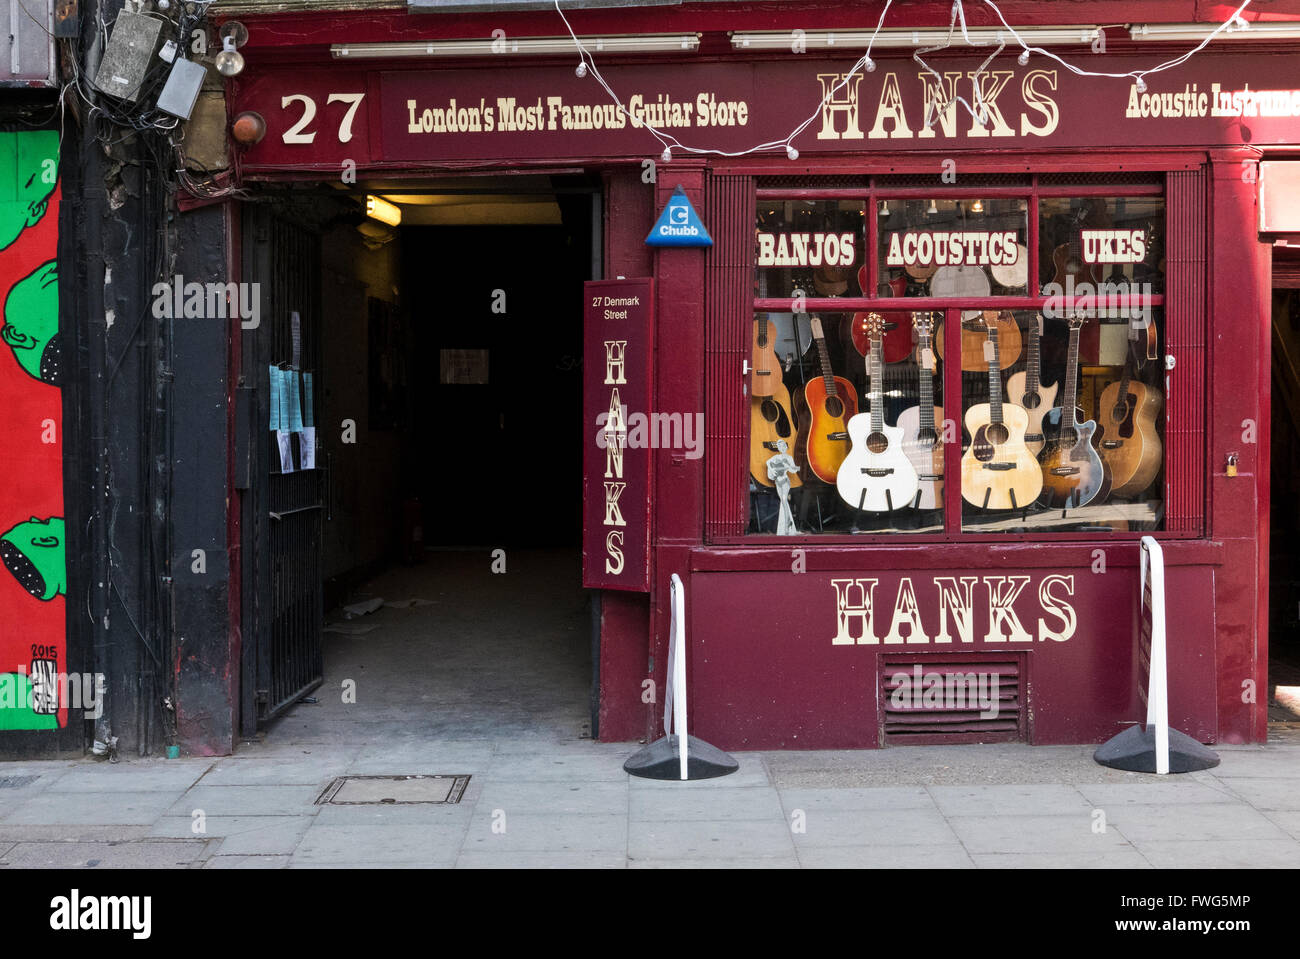 The facade of Hanks the famous guitar store in London, United Kingdom. Stock Photo